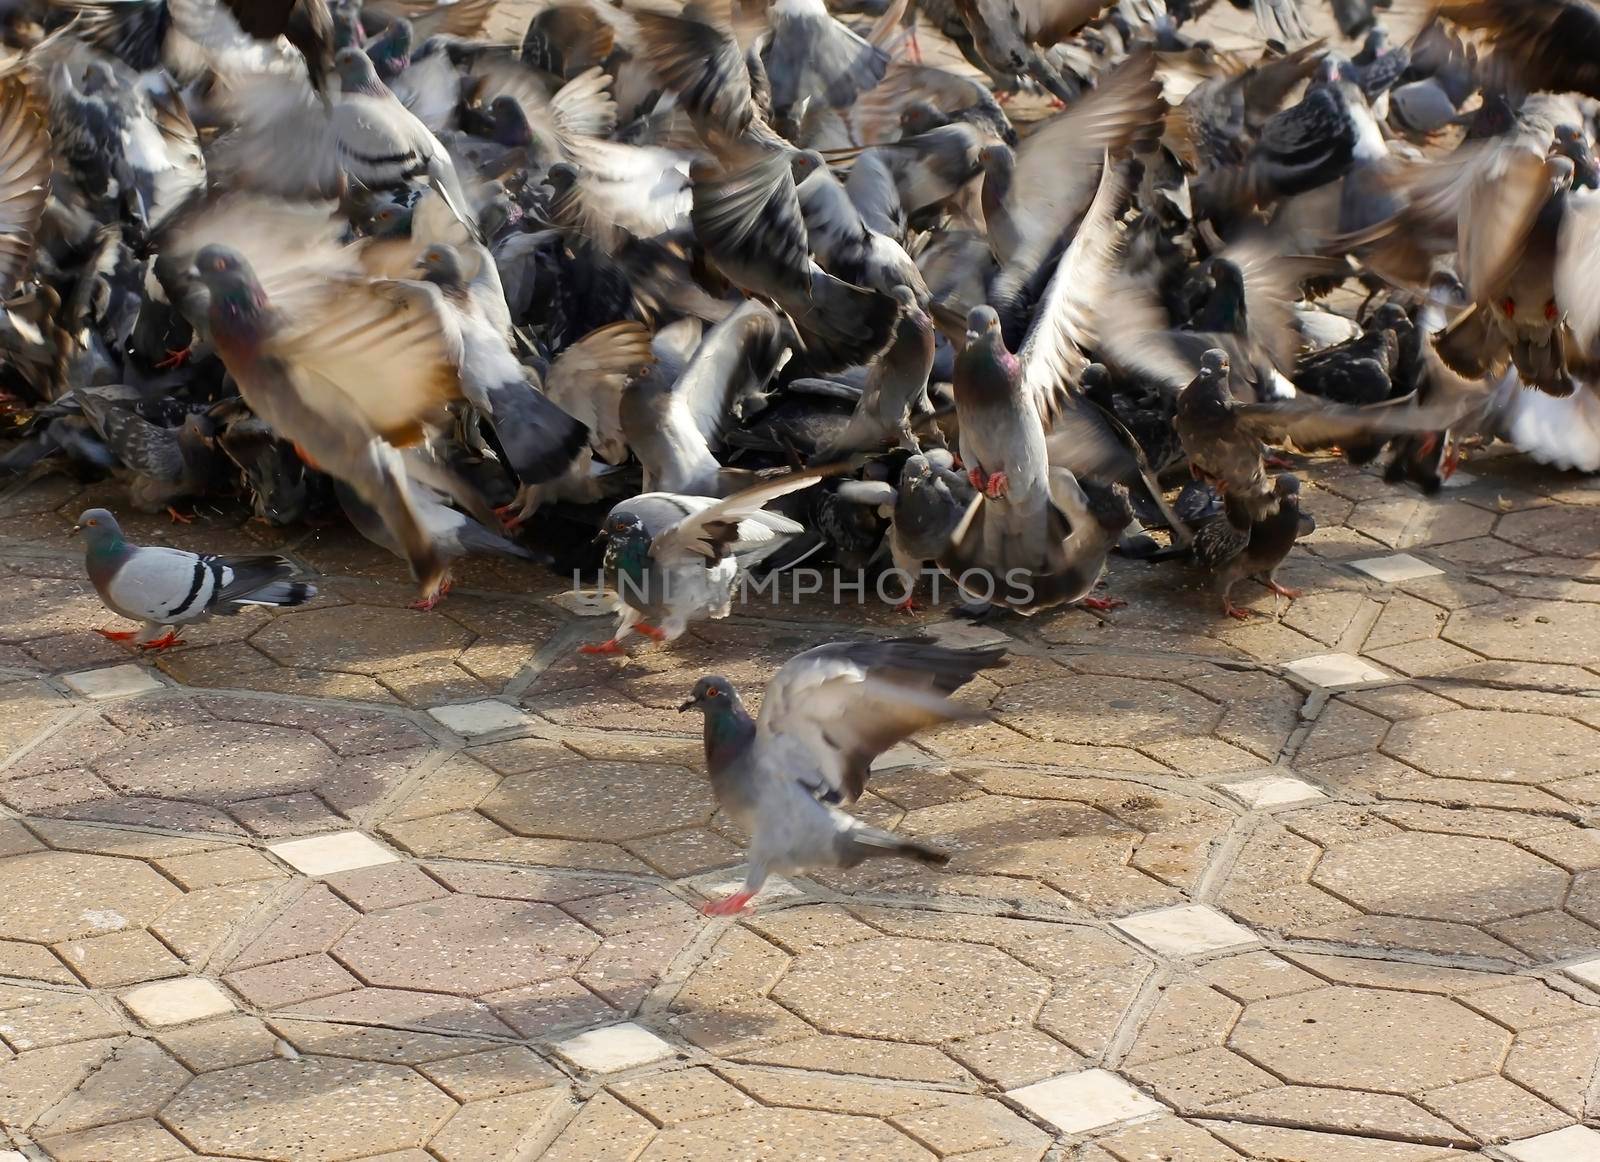 Chaotic floc of pigeons by Lirch